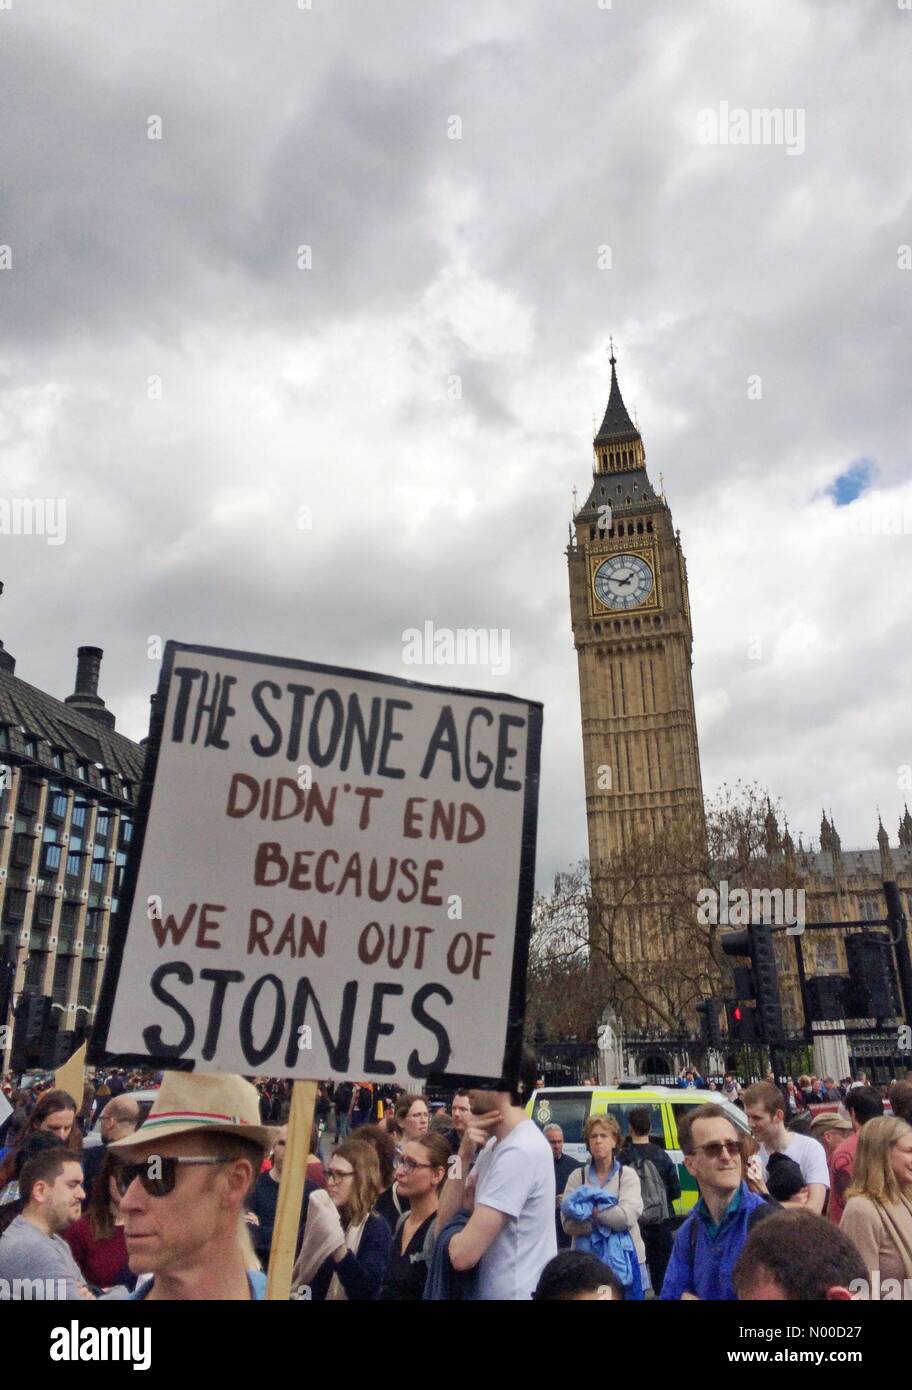 St Margaret St, London, UK. 22nd Apr, 2017. March for Science, 22nd April 2017 London, UK. Part of an international movement recognising the need to preserve the productive & diverse research partnerships in the UK, EU and around the world. Credit: Marc J Boettcher/StockimoNews/Alamy Live News Stock Photo